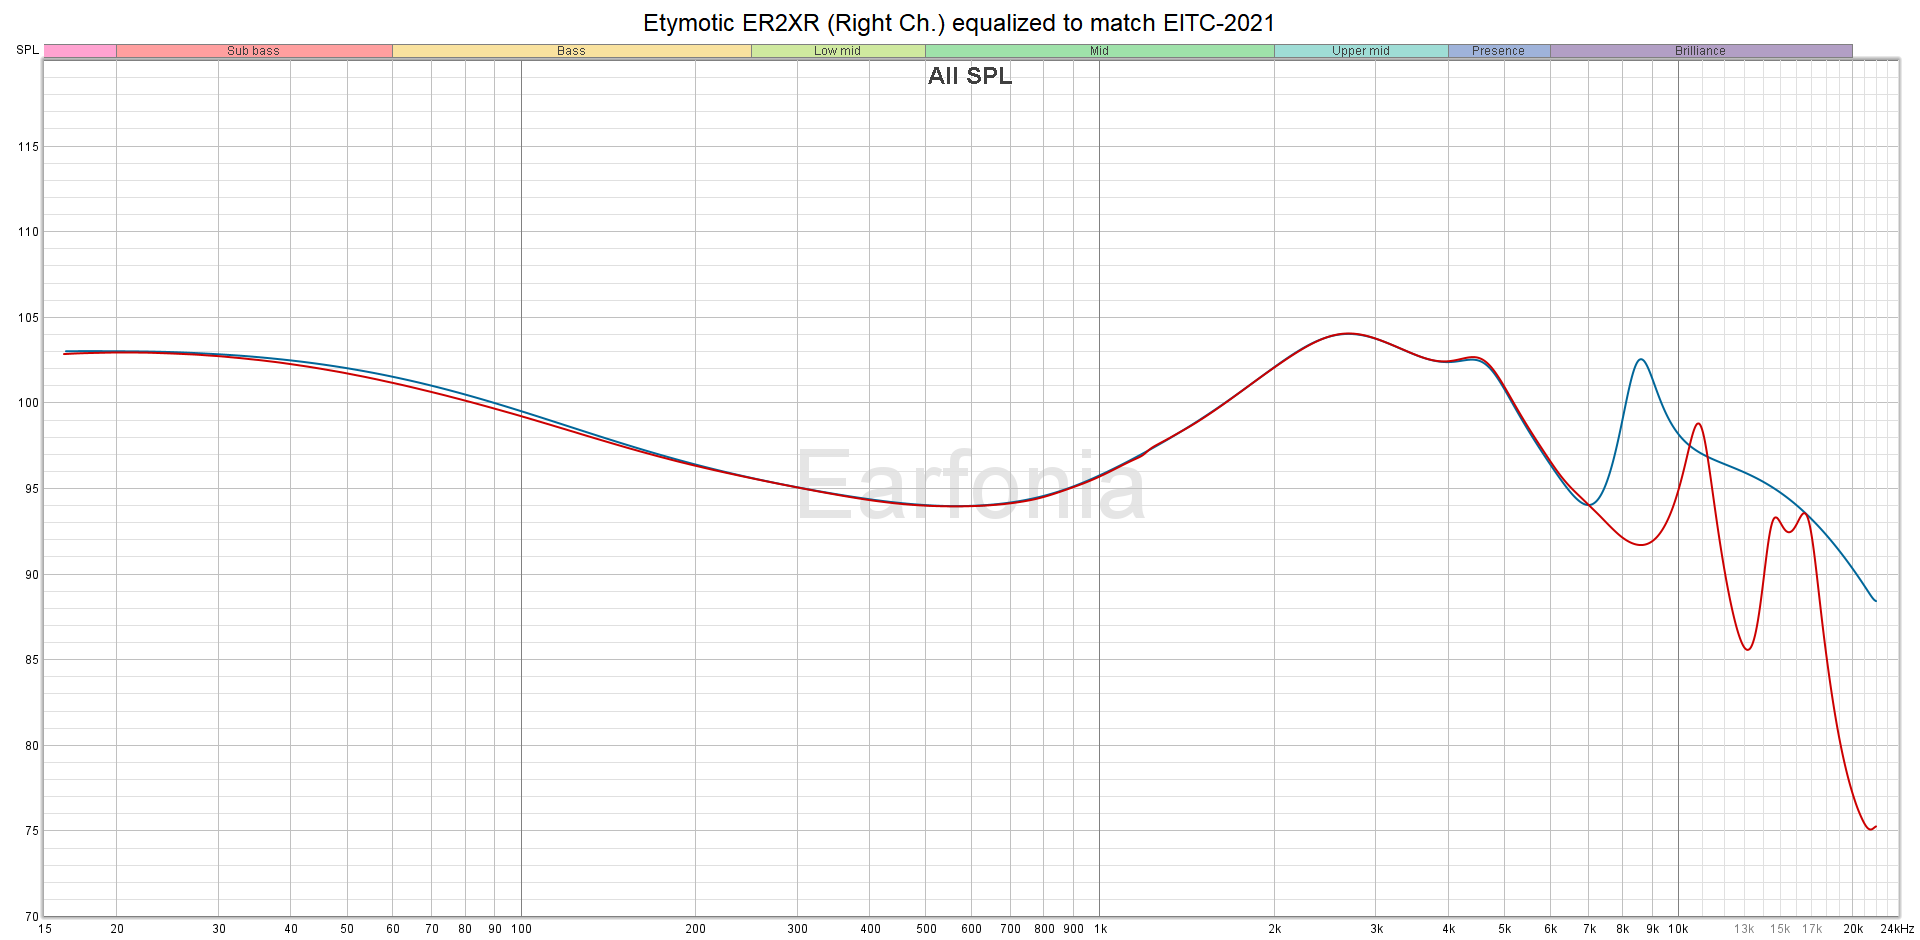 M04 Etymotic ER2XR equalized to match EITC-2021.png